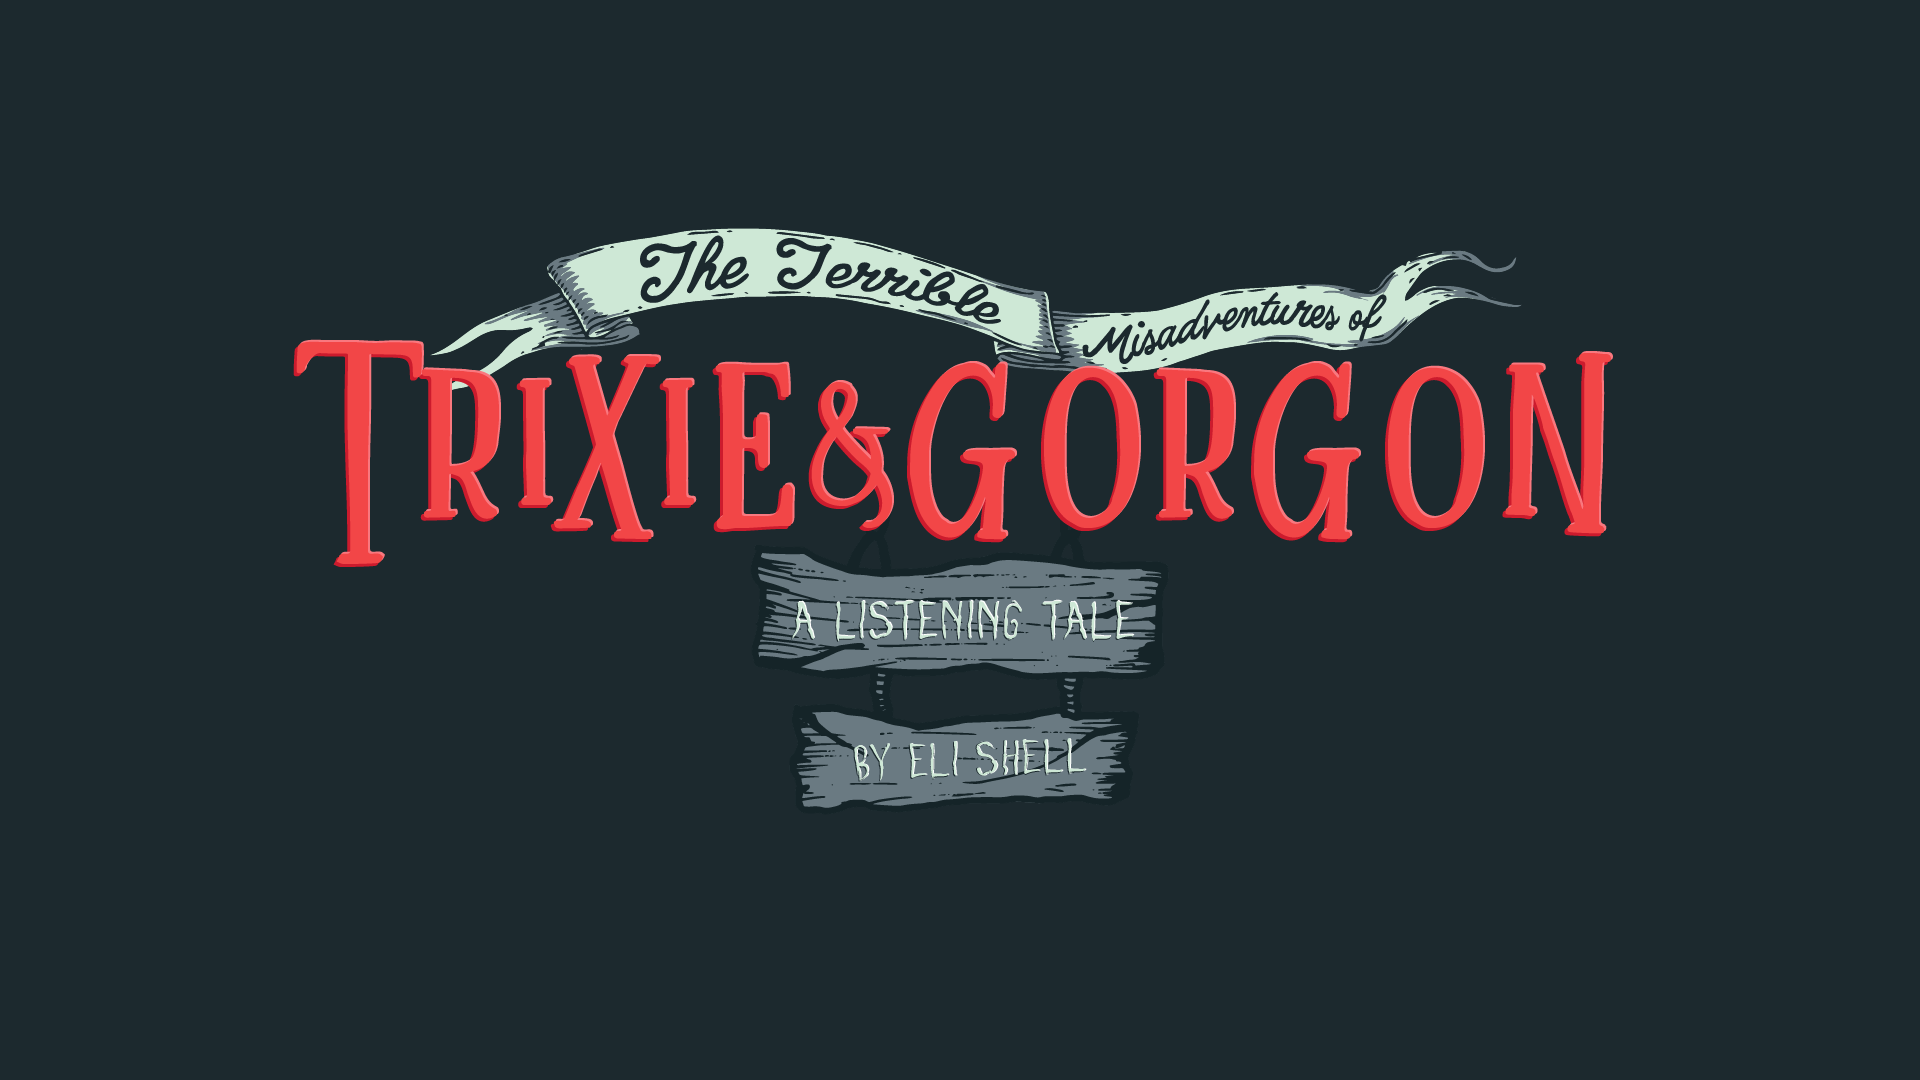 The Terrible Misadventures of Trixie and Gorgon